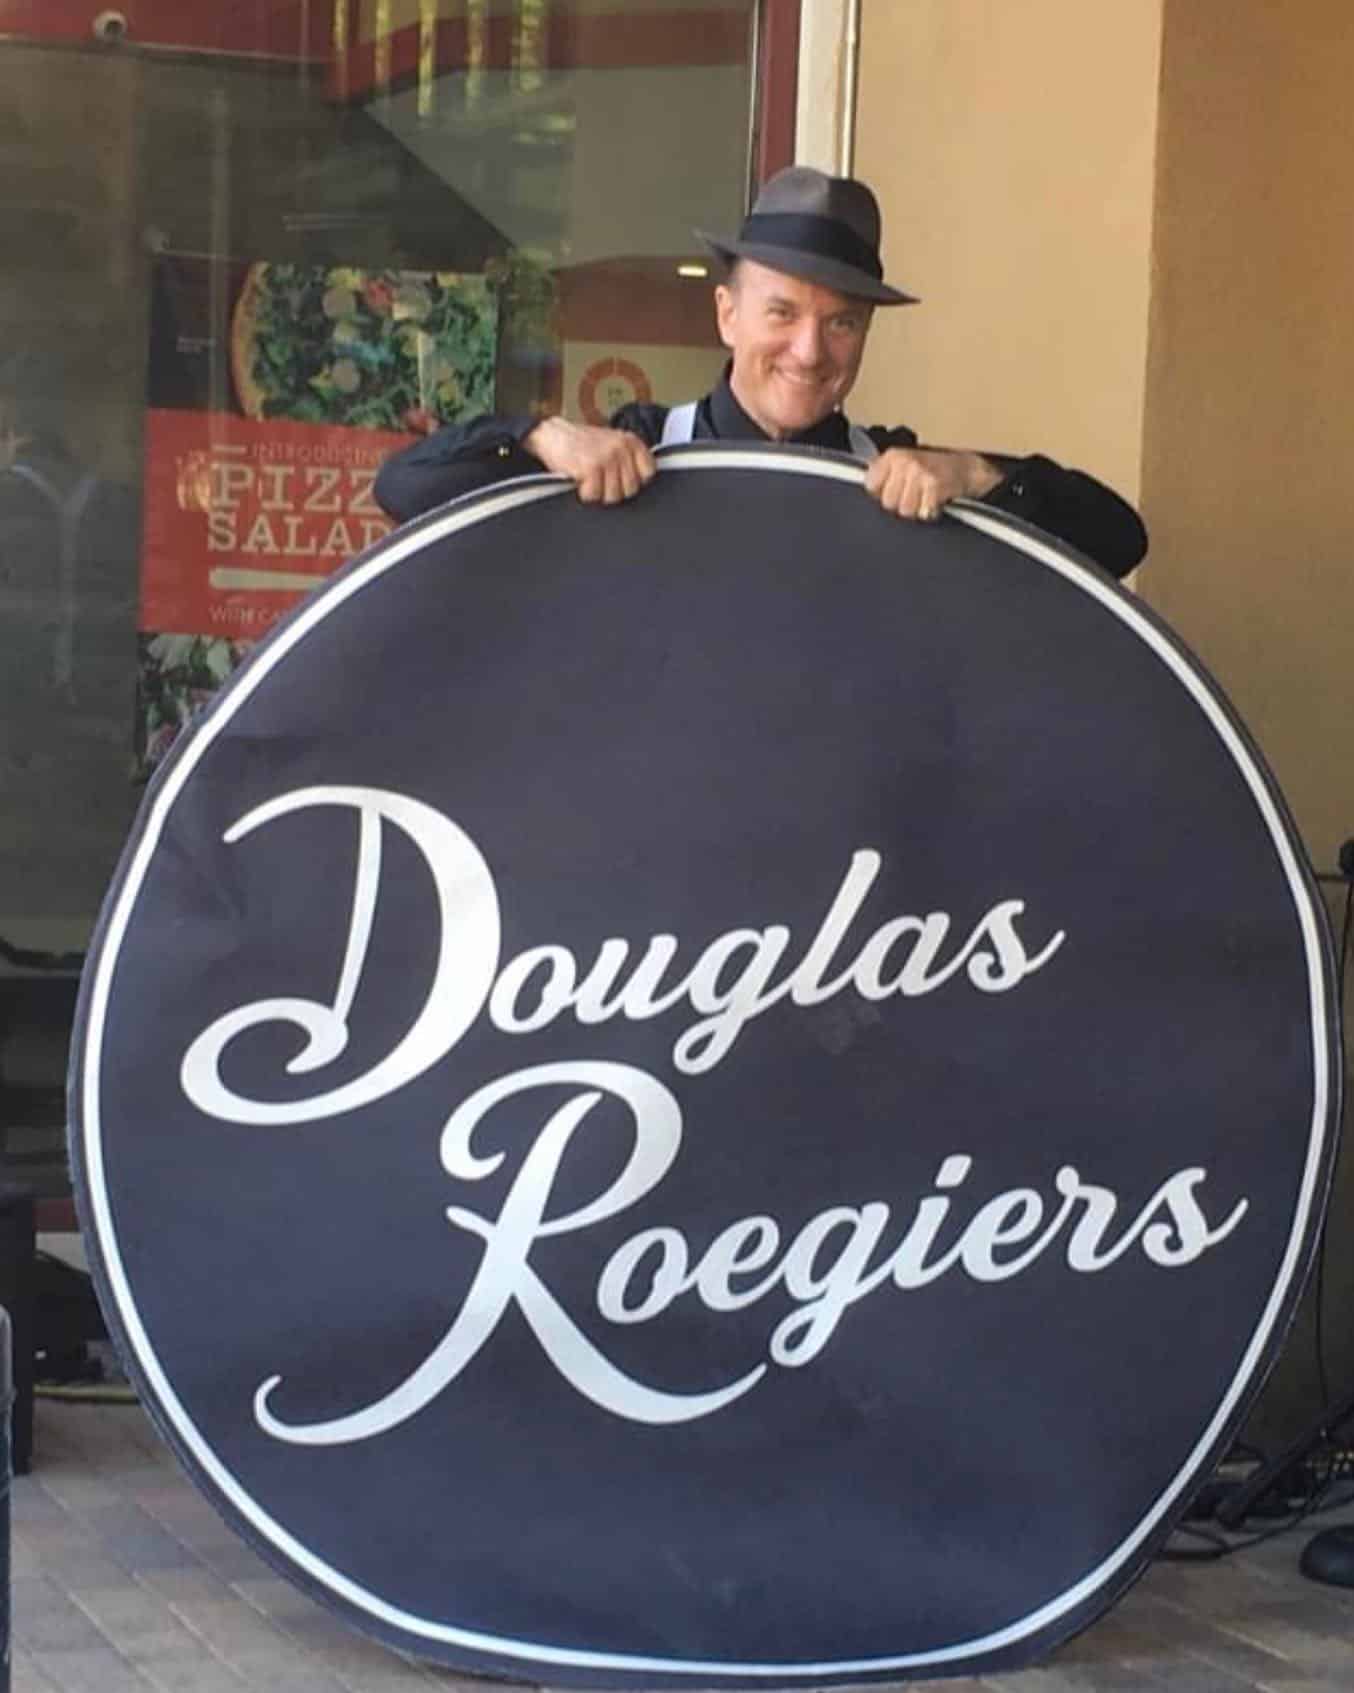 Douglas Roegiers Joe's Italian Restaurant and Bar Le Grand Barr on the patio from 6:30 to 9:30 PM.